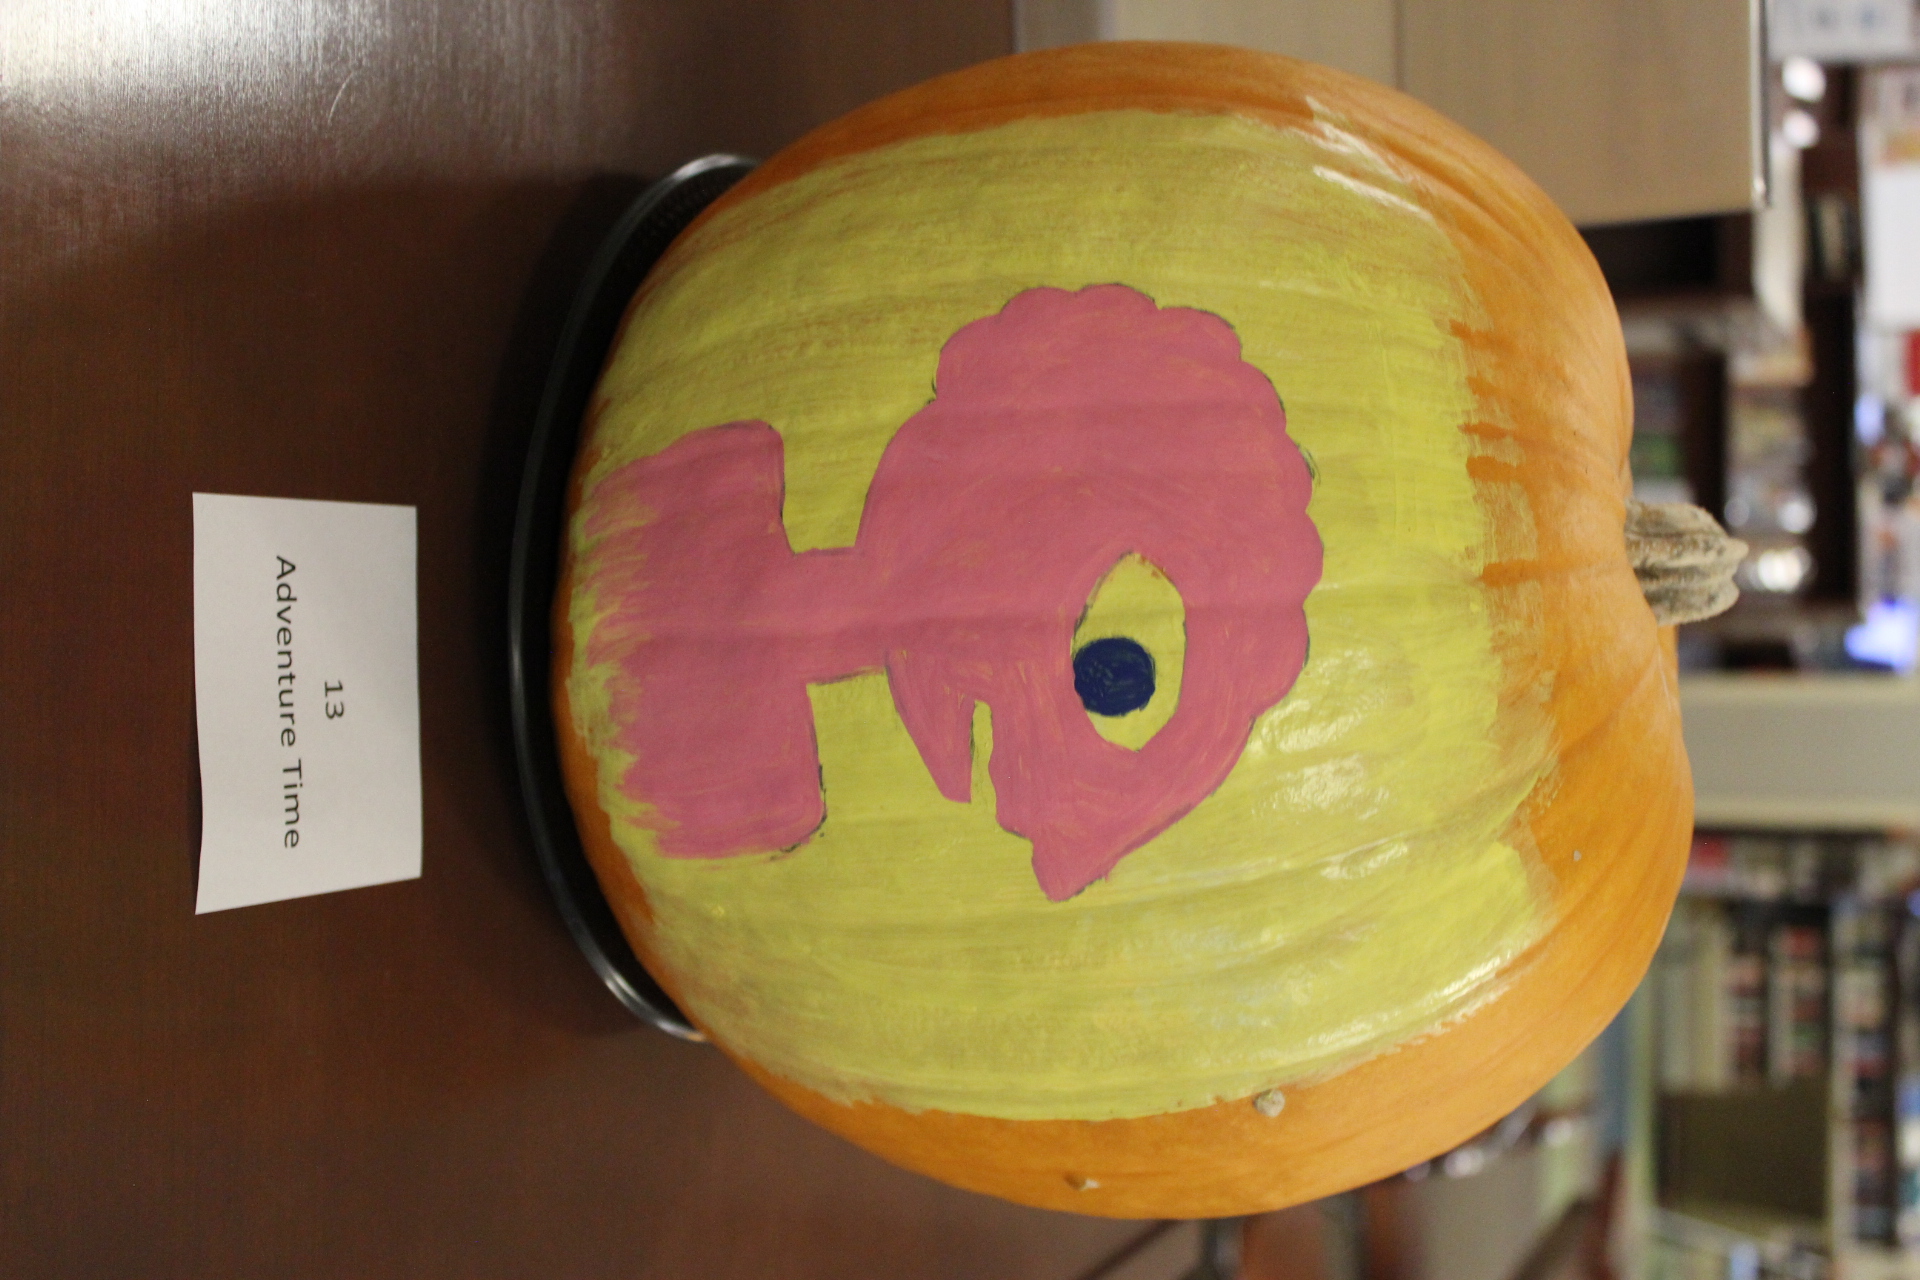 Pumpkin decorated as "Adventure Time"